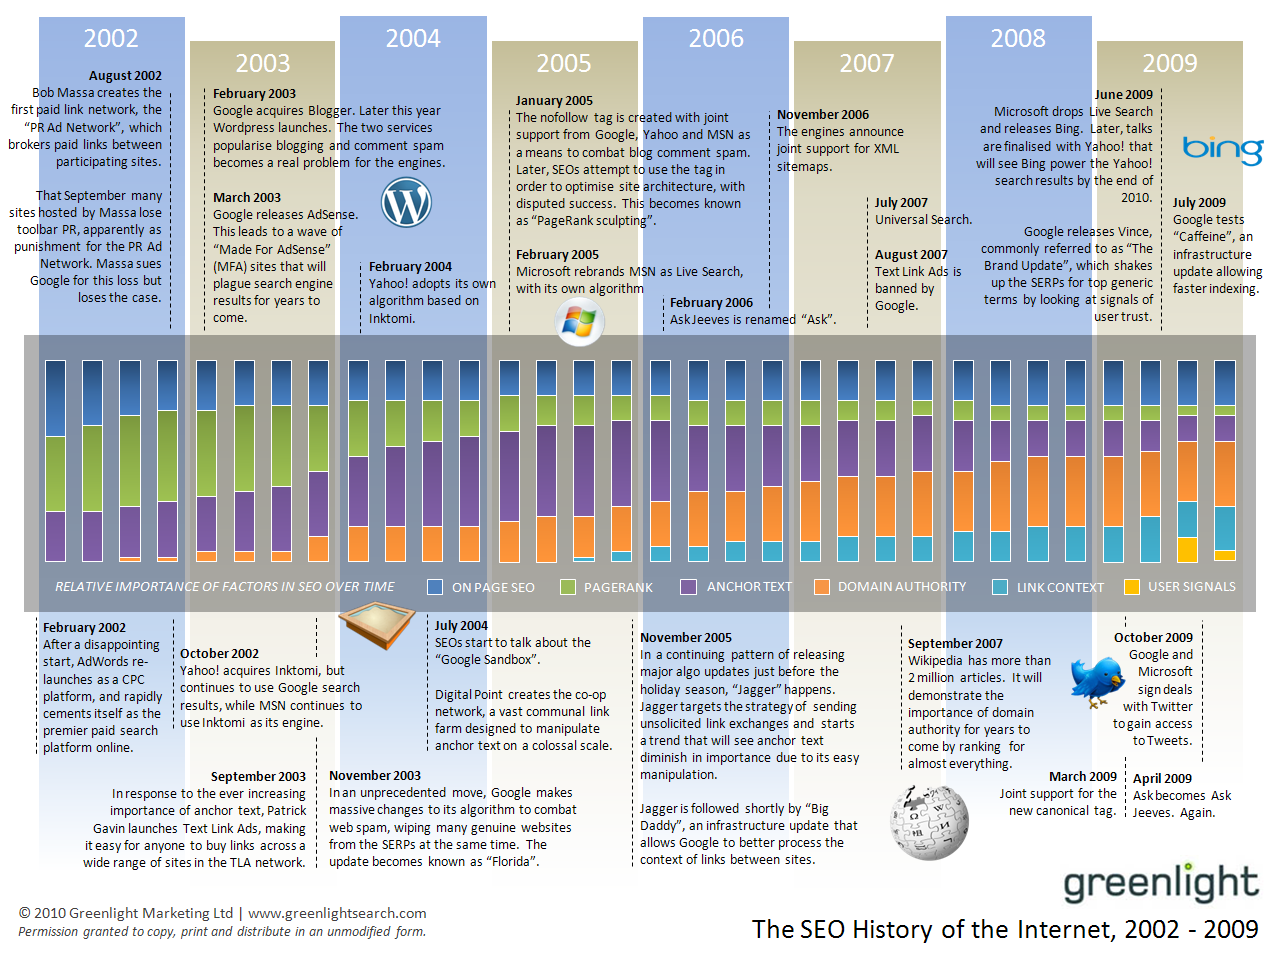 http://www.greenlightsearch.com/assets/images/history/greenlight-history-of-seo-2002-2009.png